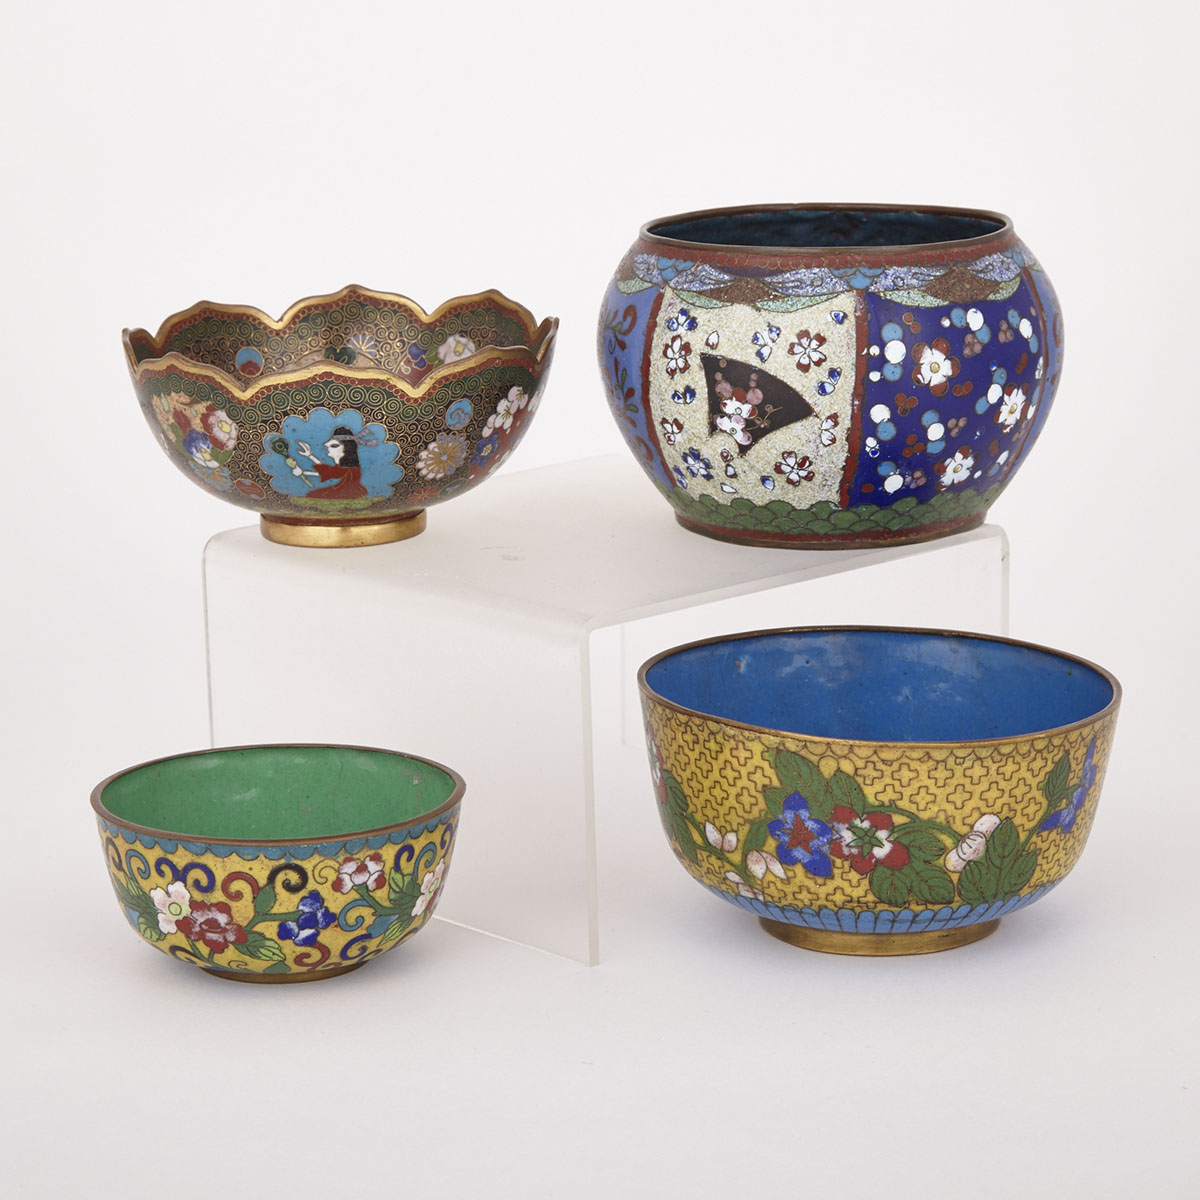 Four Japanese Cloisonne Bowls, early 20th Century